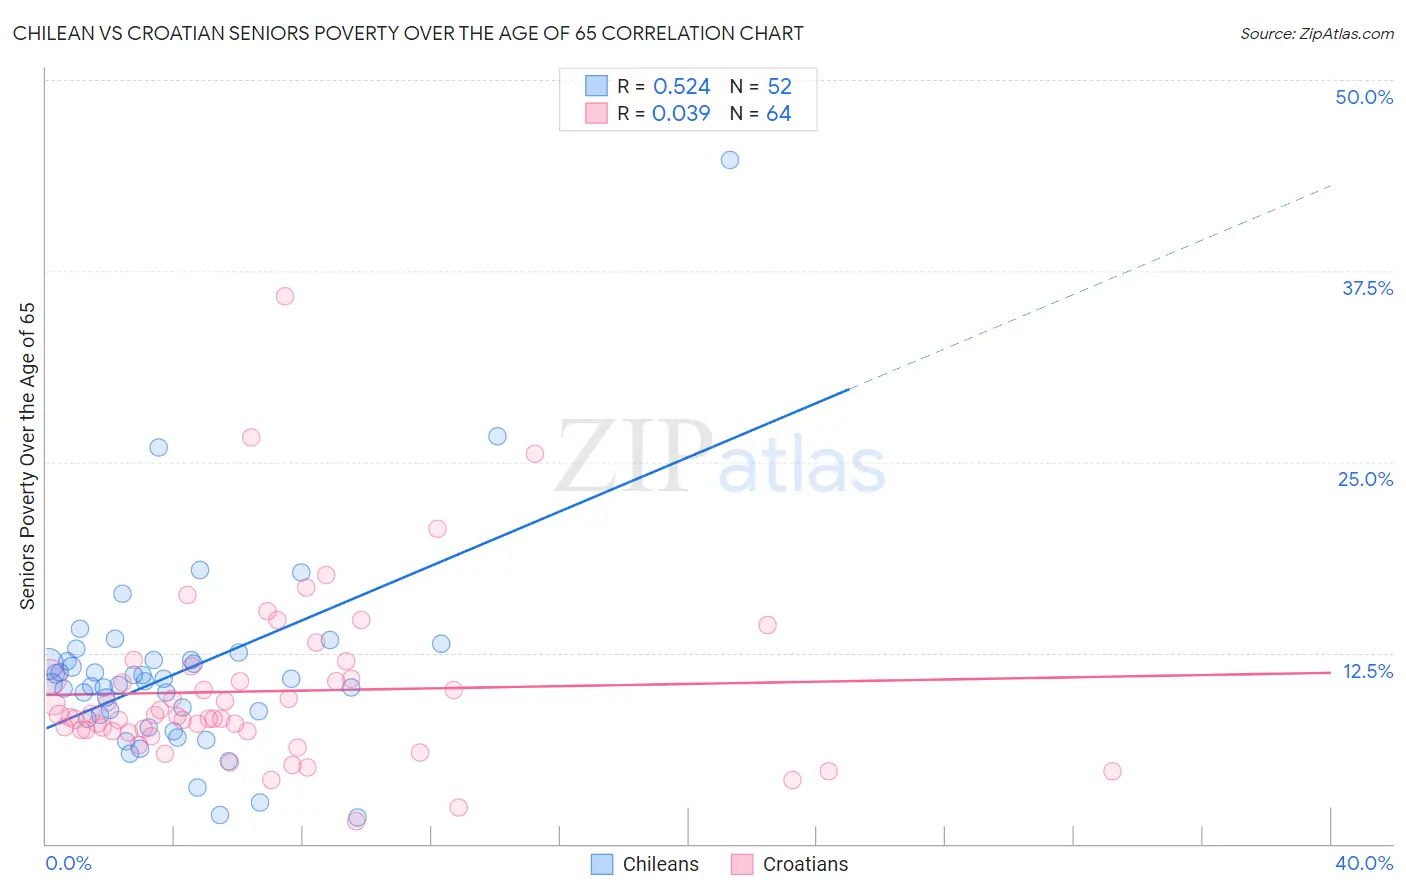 Chilean vs Croatian Seniors Poverty Over the Age of 65